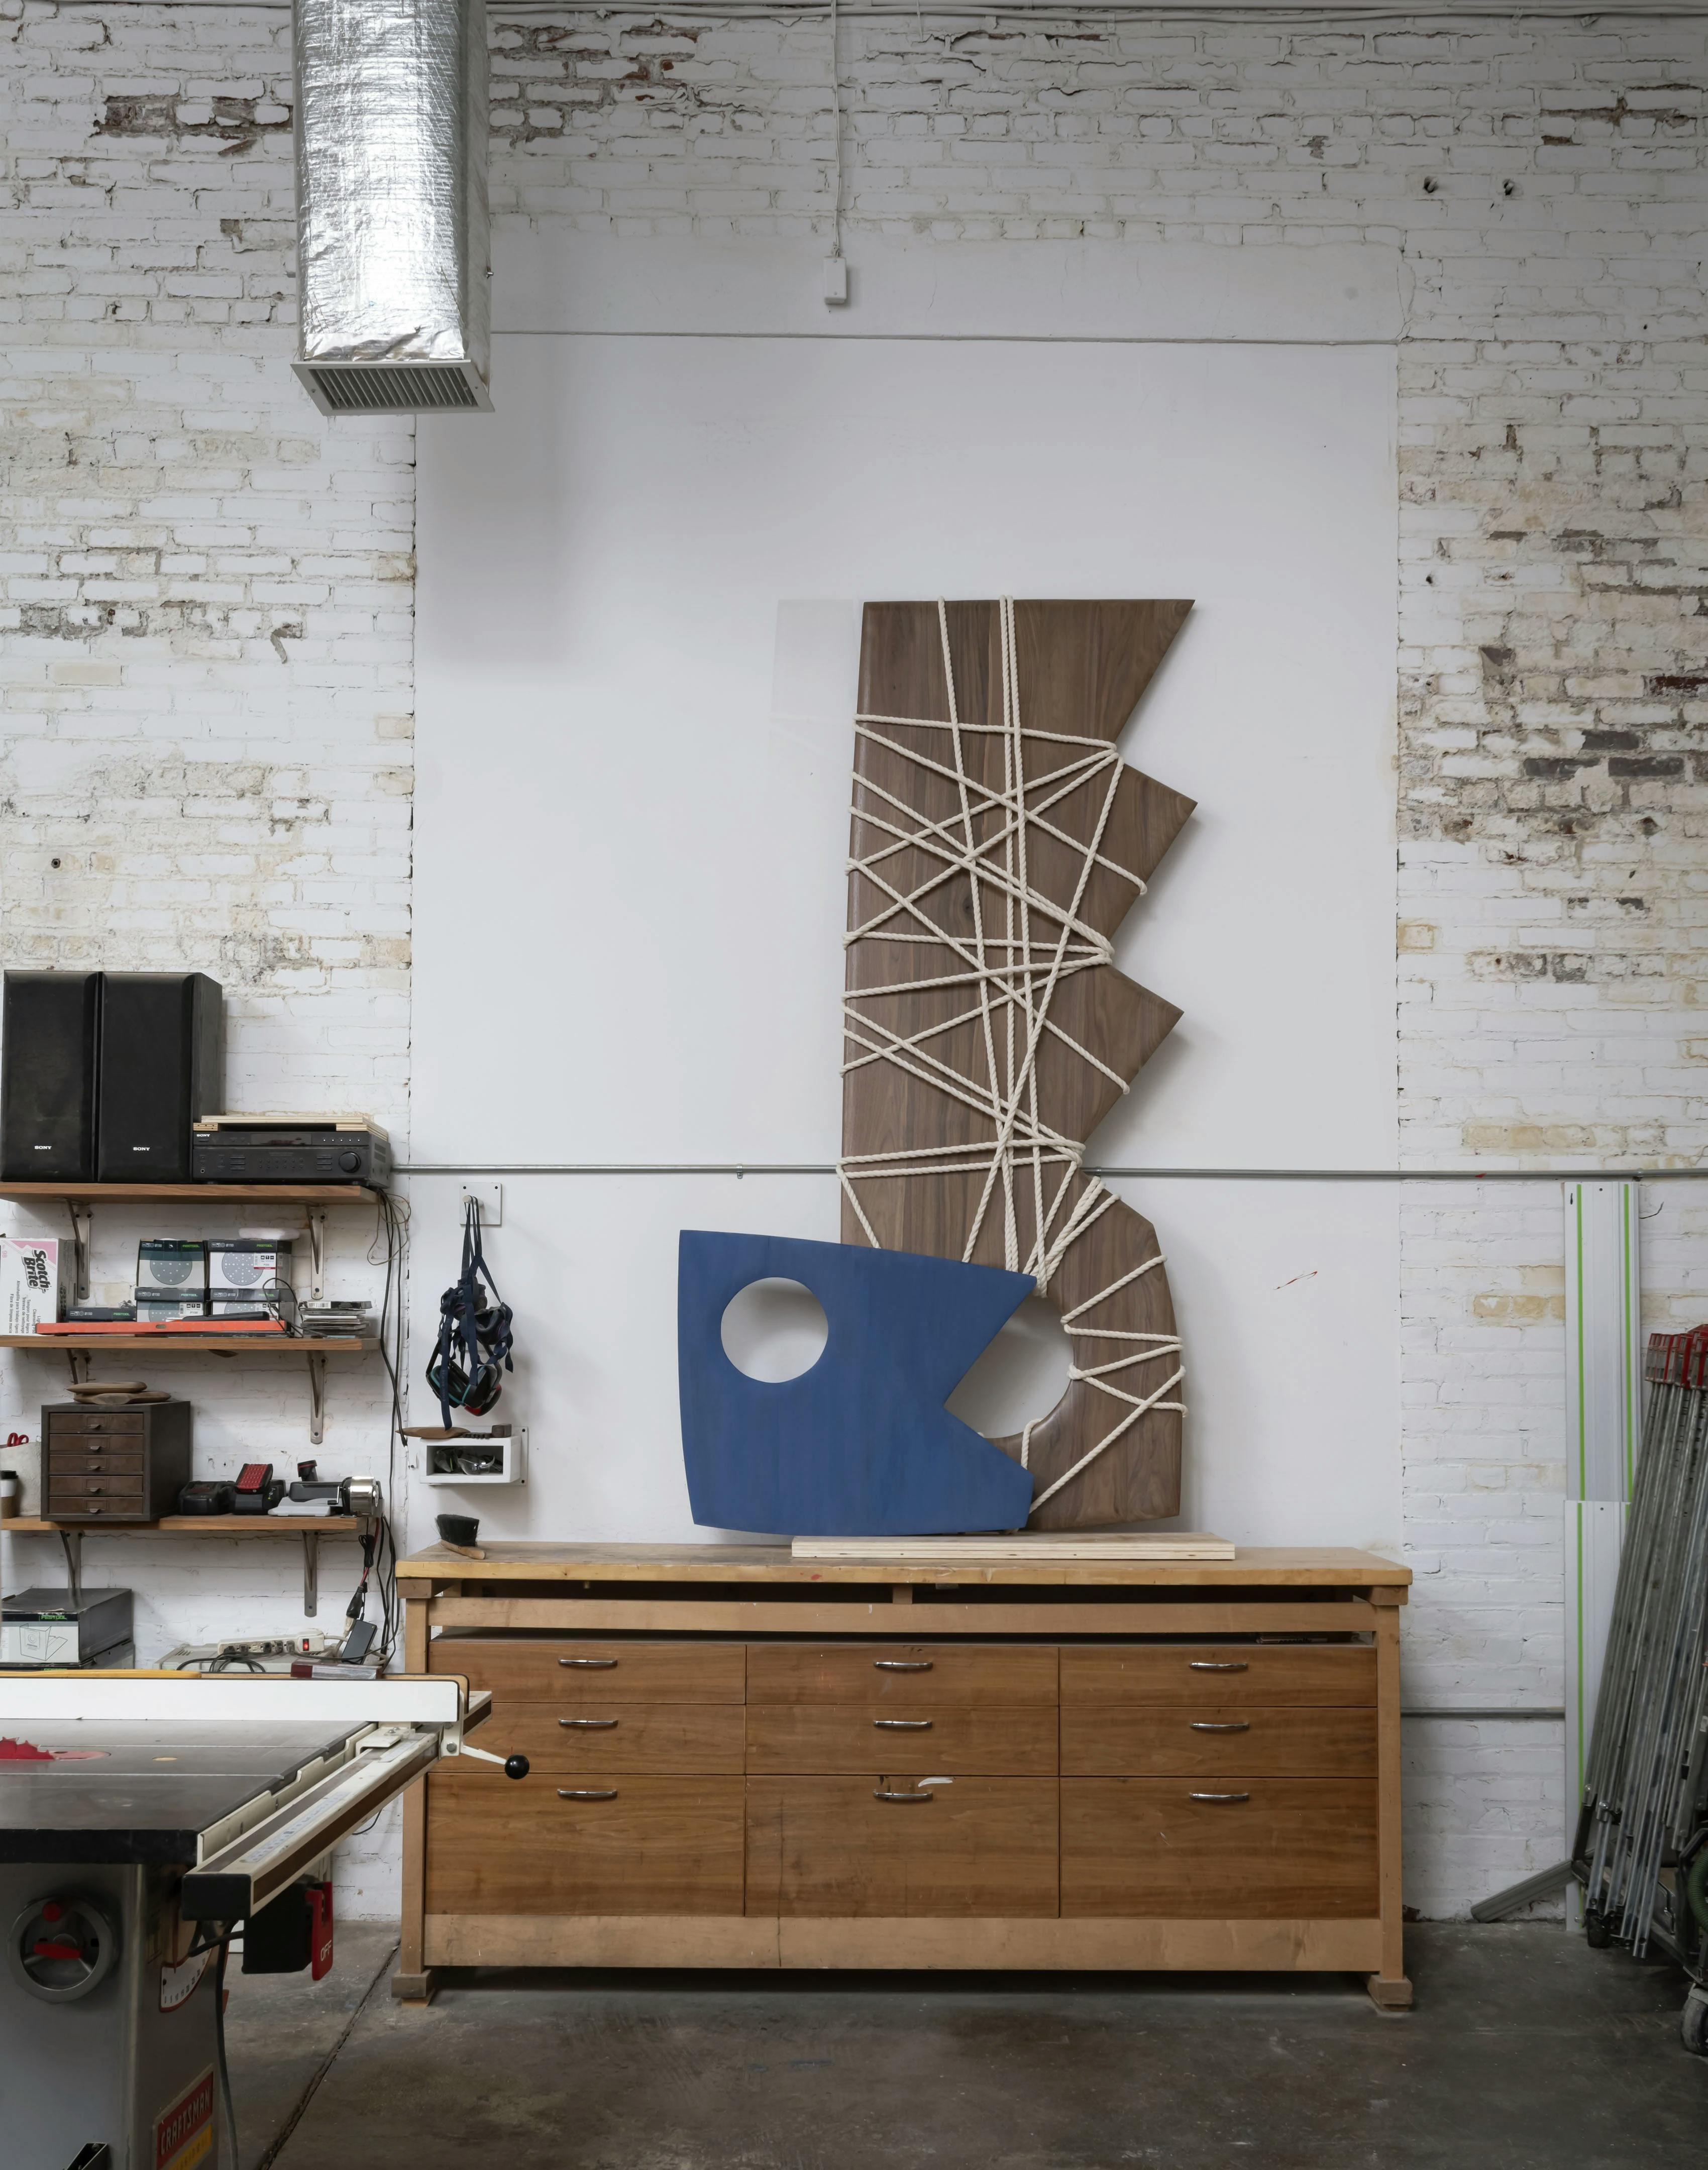 Two wall-based sculptures with jagged edges leaning against a white wall in artist Fitzhugh Karol's studio.